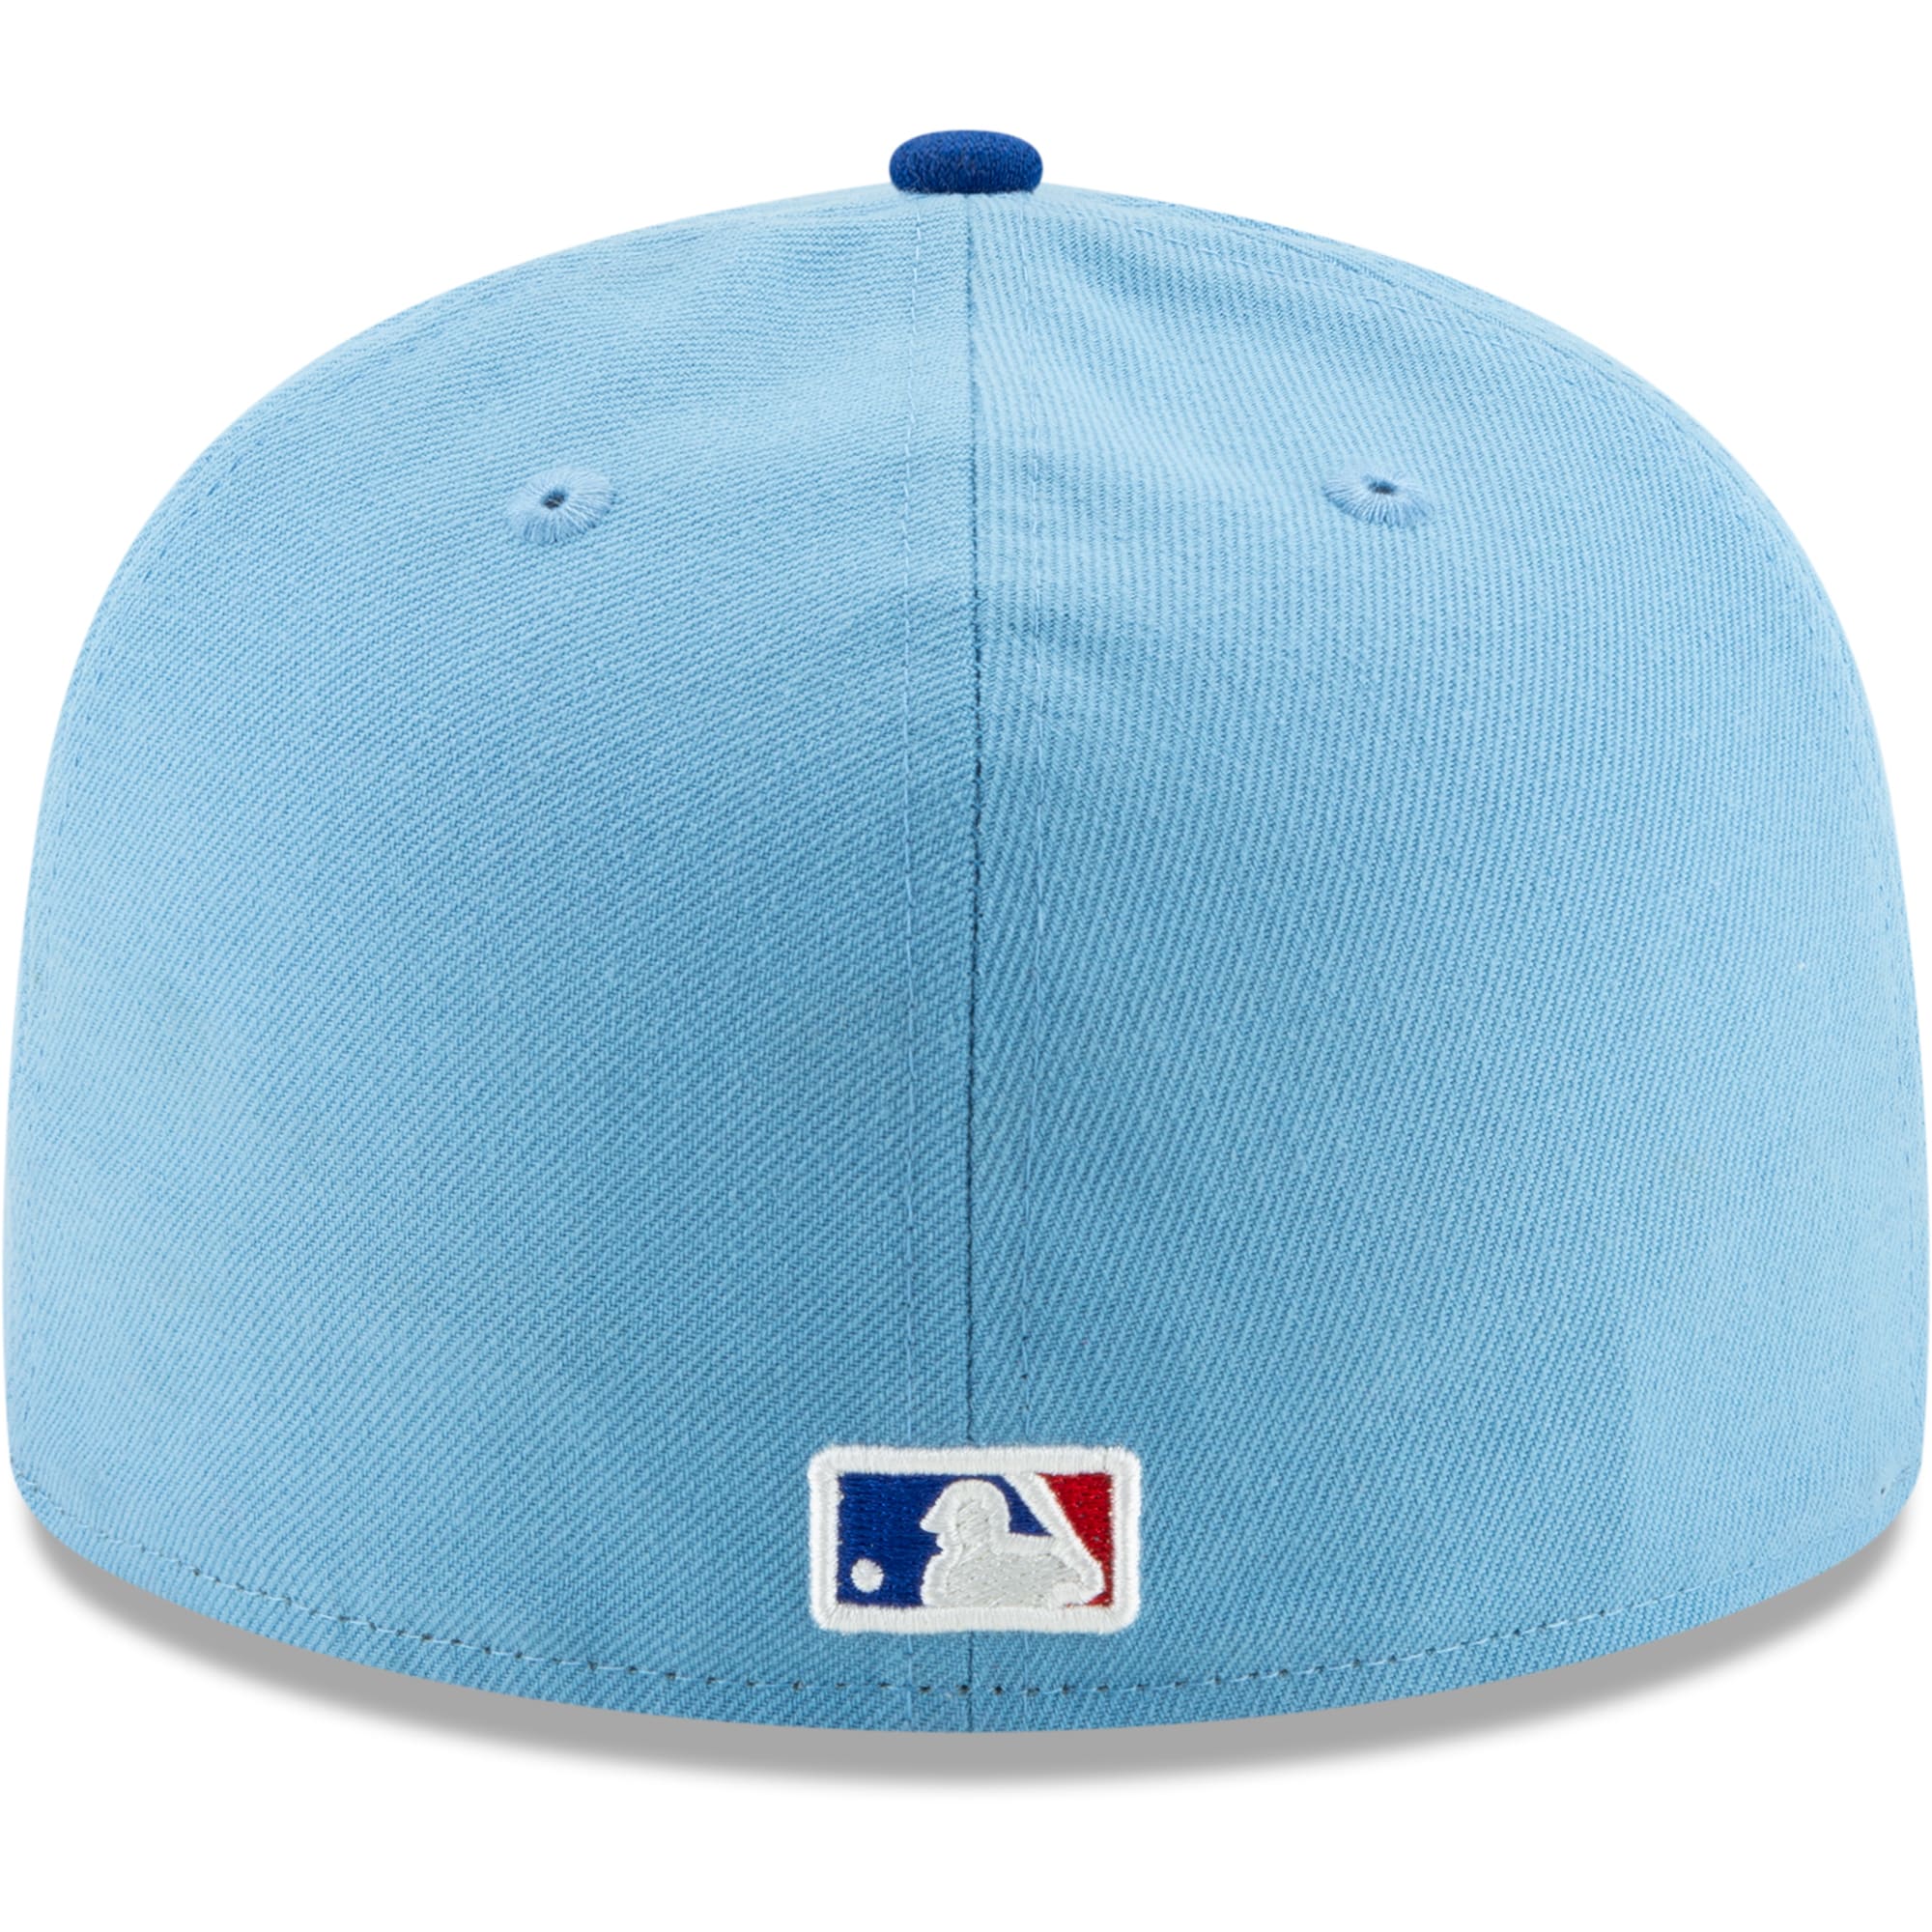 Men's New Era Texas Rangers Light Blue/Royal On-Field Authentic Collection 59FIFTY Fitted Hat - image 4 of 4